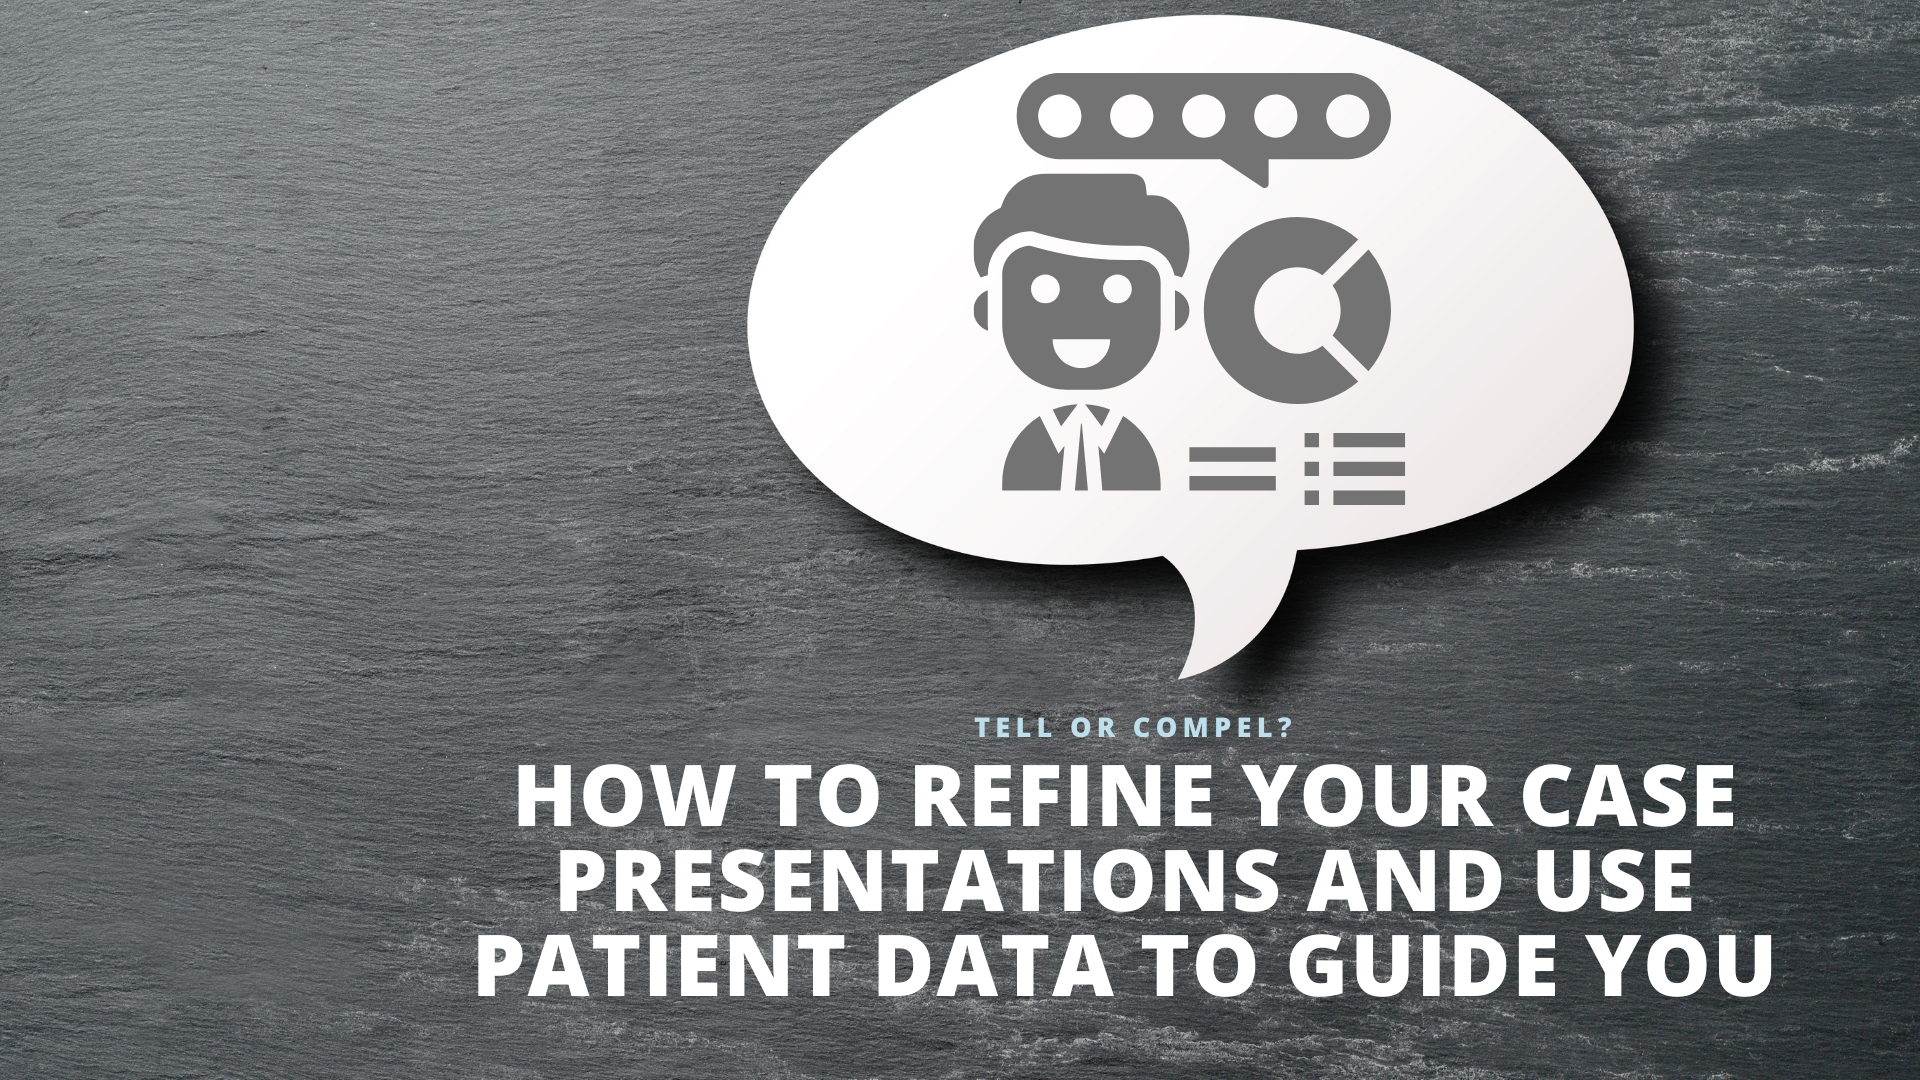 How to Refine Your Case Presentations and Use Patient Data to Guide You